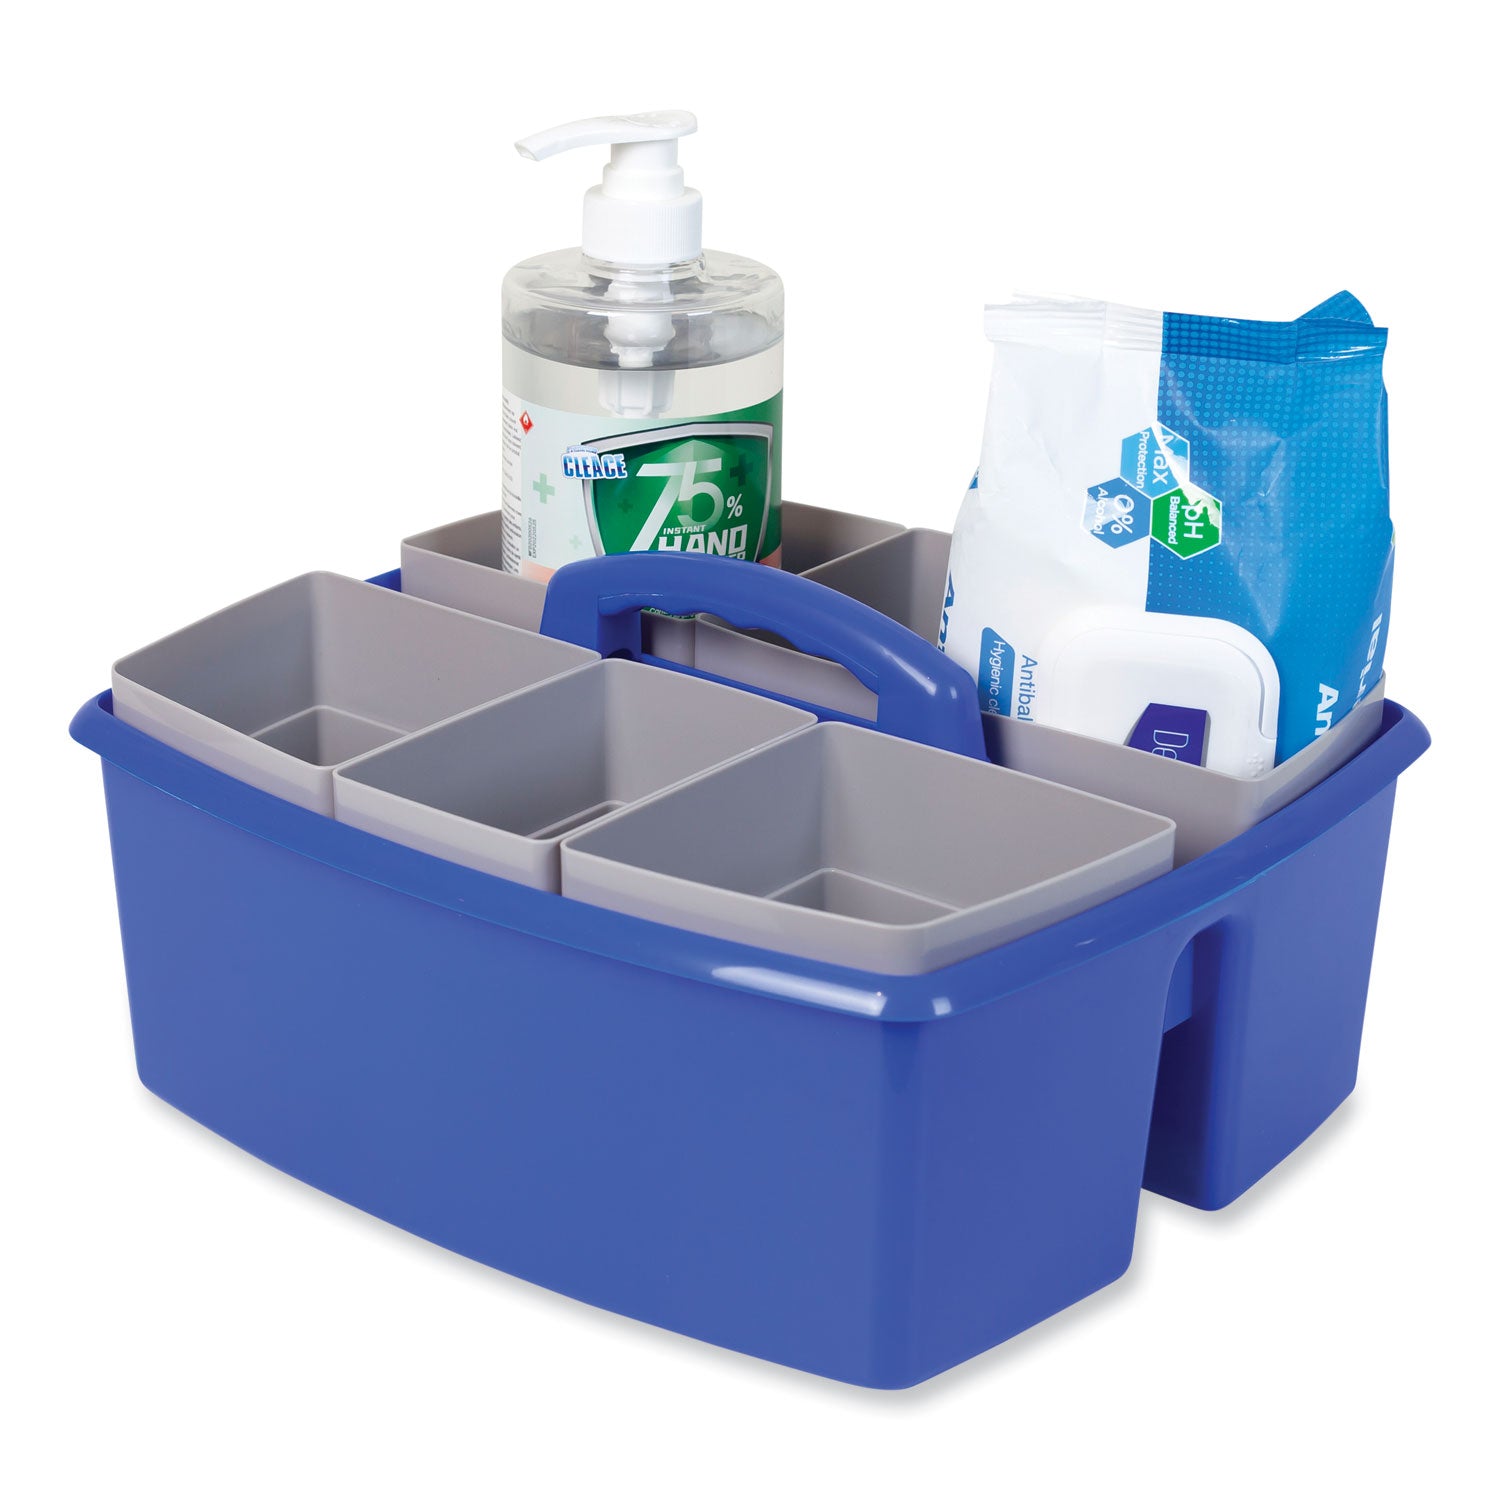 large-caddy-with-sorting-cups-blue-2-carton_stx00985u02c - 6